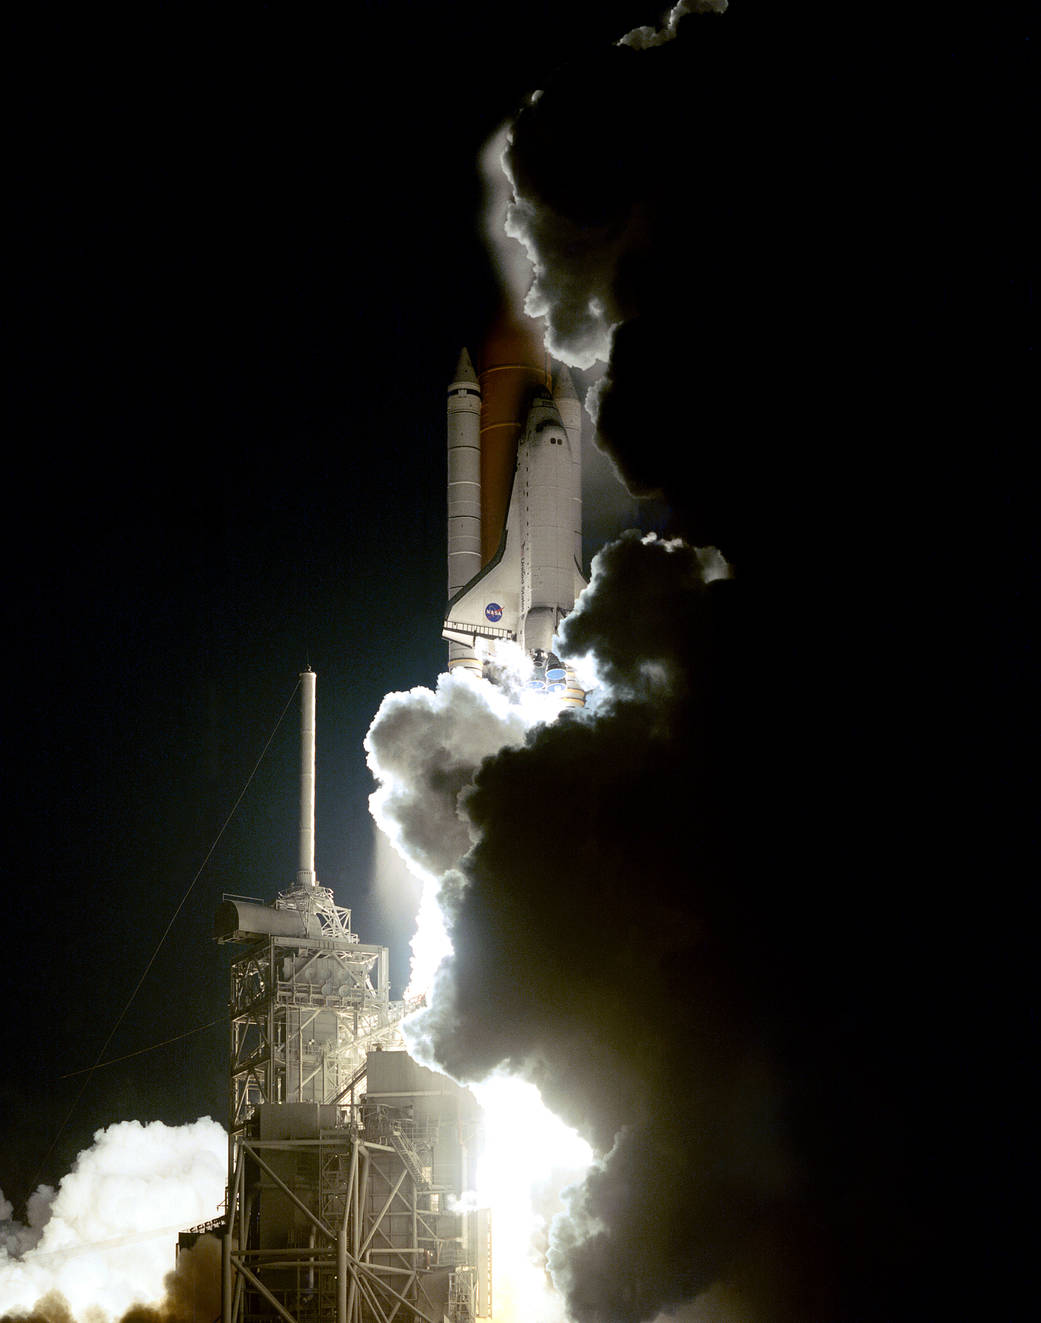 Space shuttle lifts off from launchpad at night